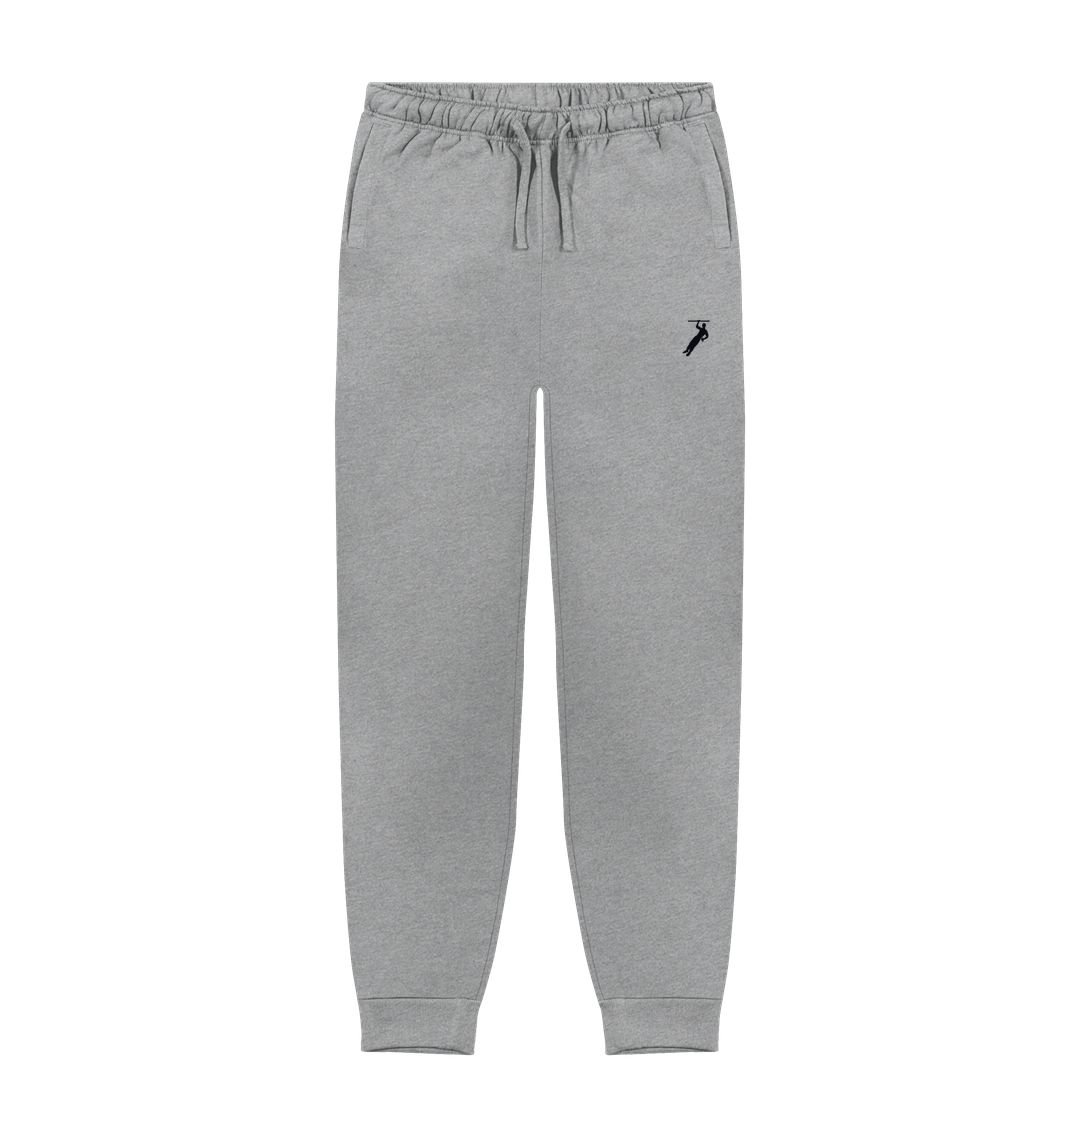 Athletic Grey Athletic grey Joggers with white logo